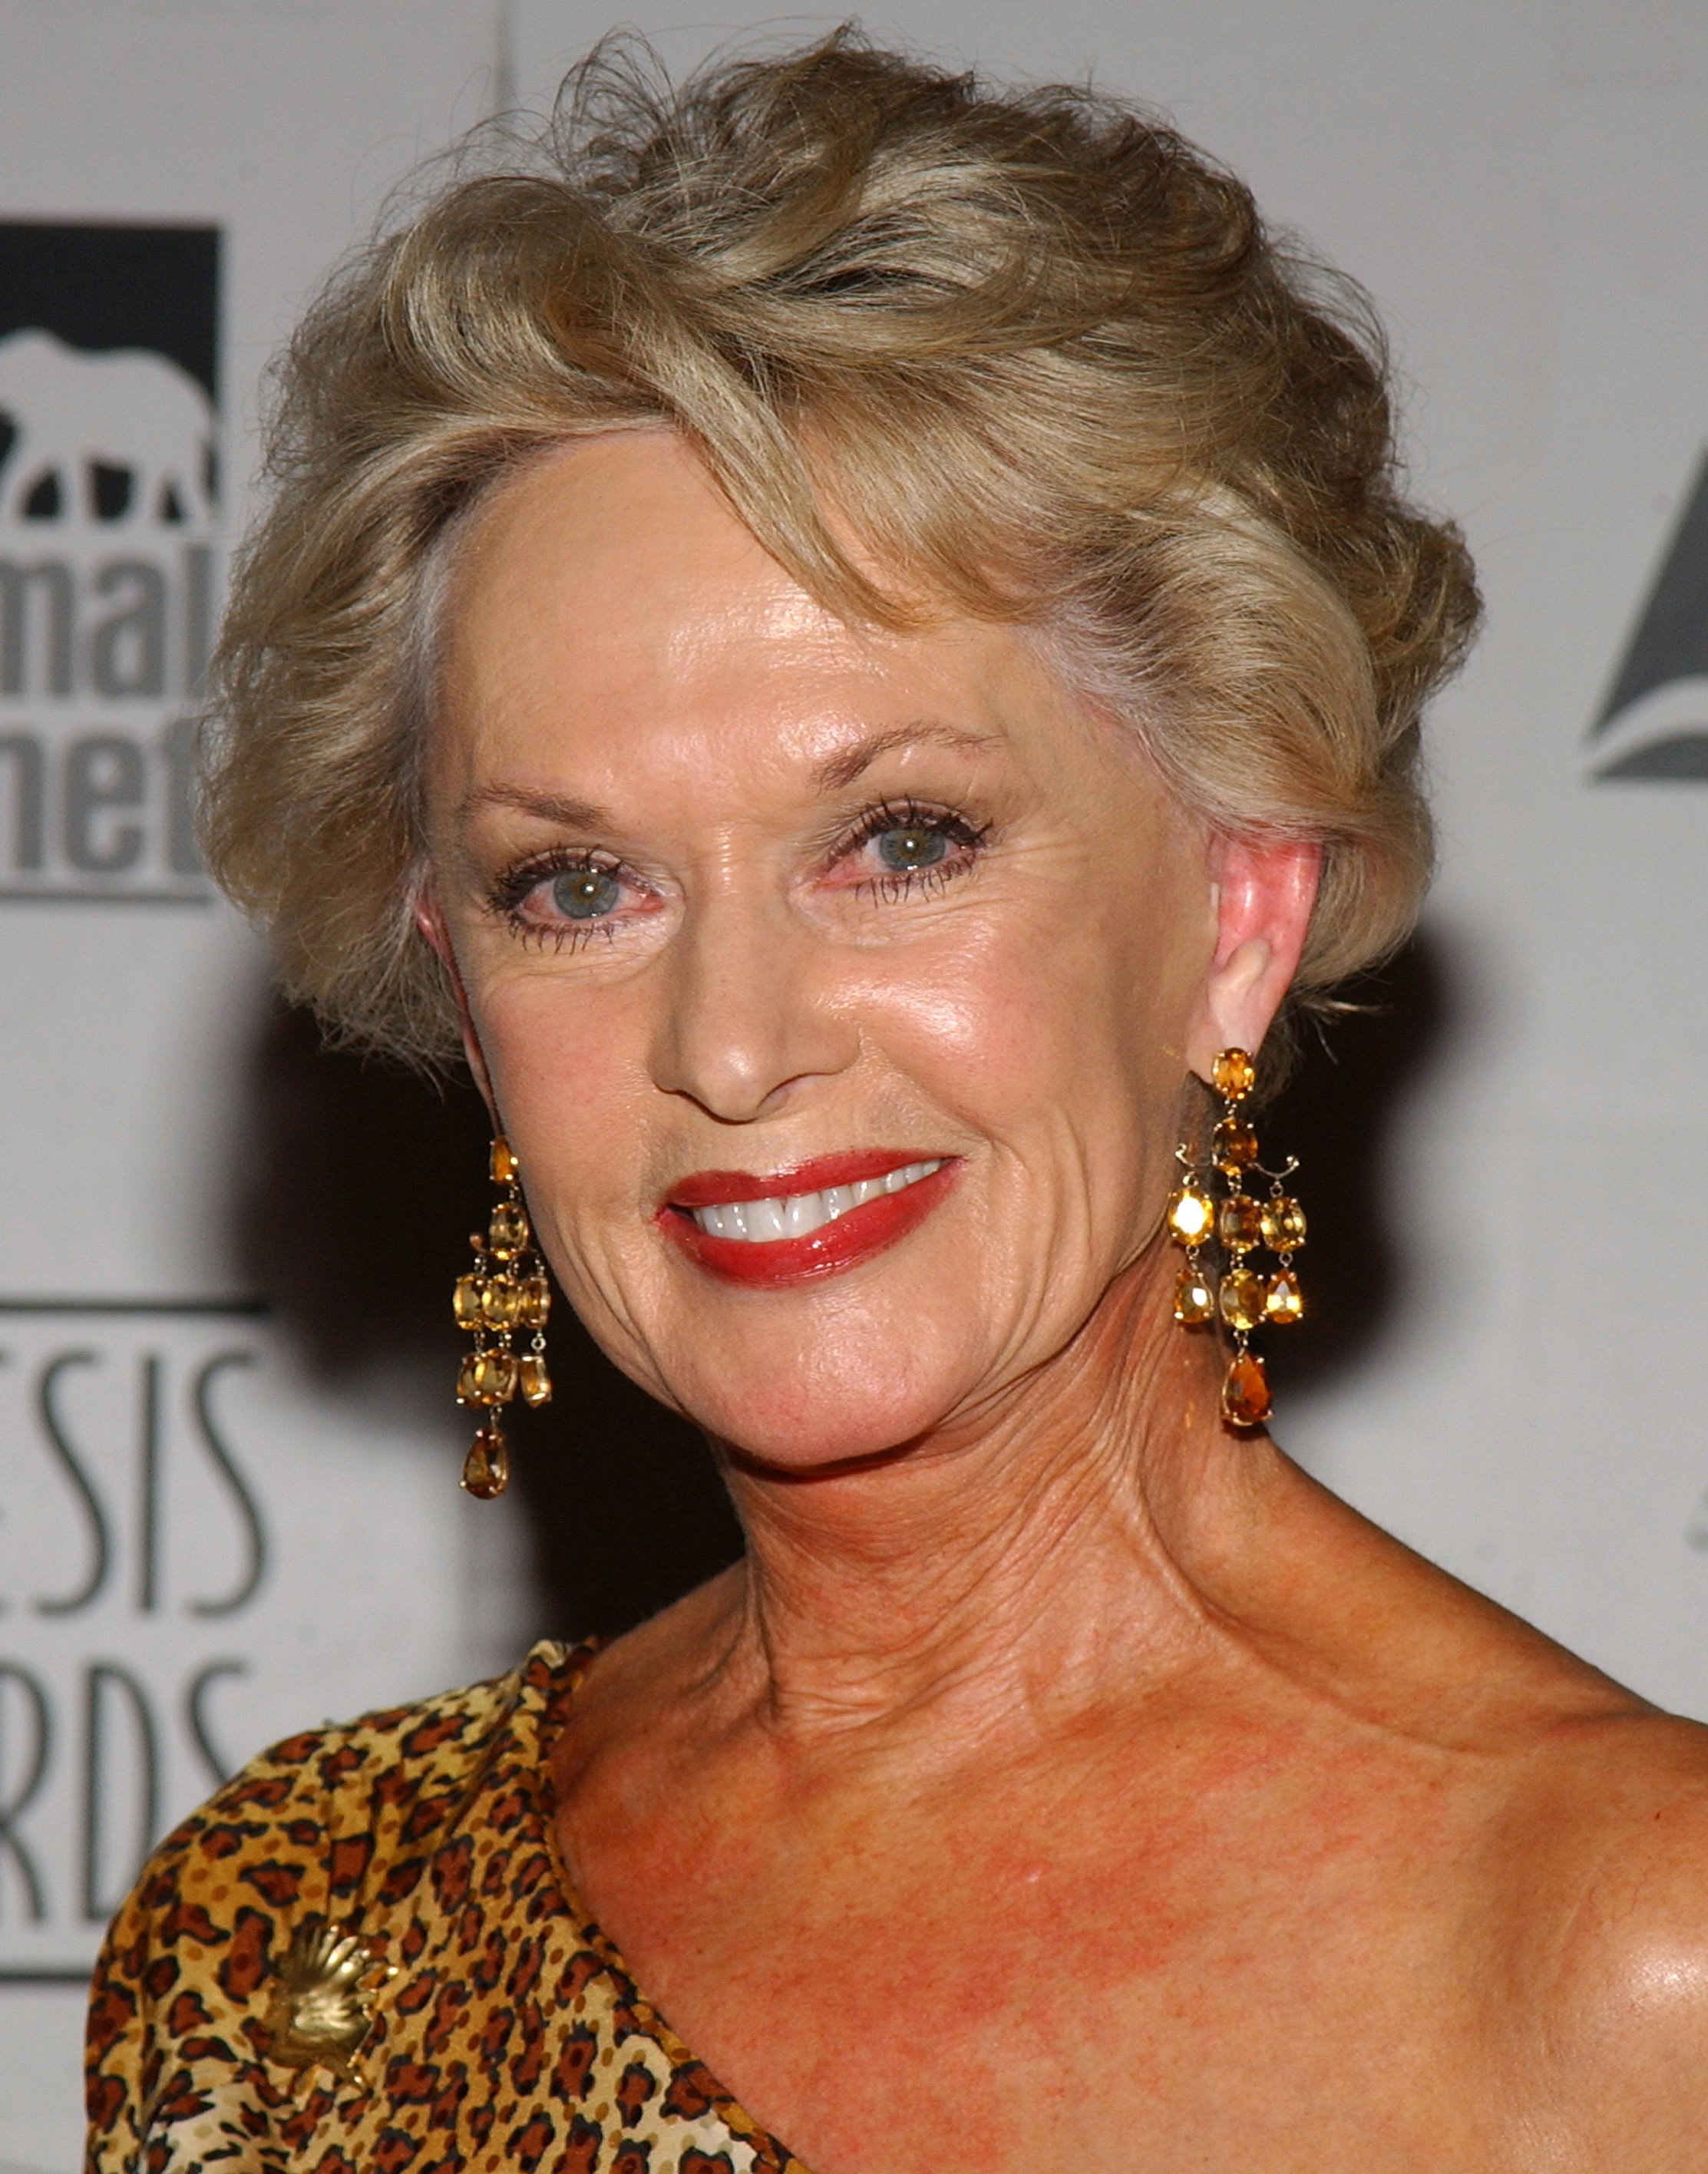 Tippi Hedren during The 18th Annual Genesis Awards and 50th Anniversary of the Humane Society of the United States. | Photo: Getty Images